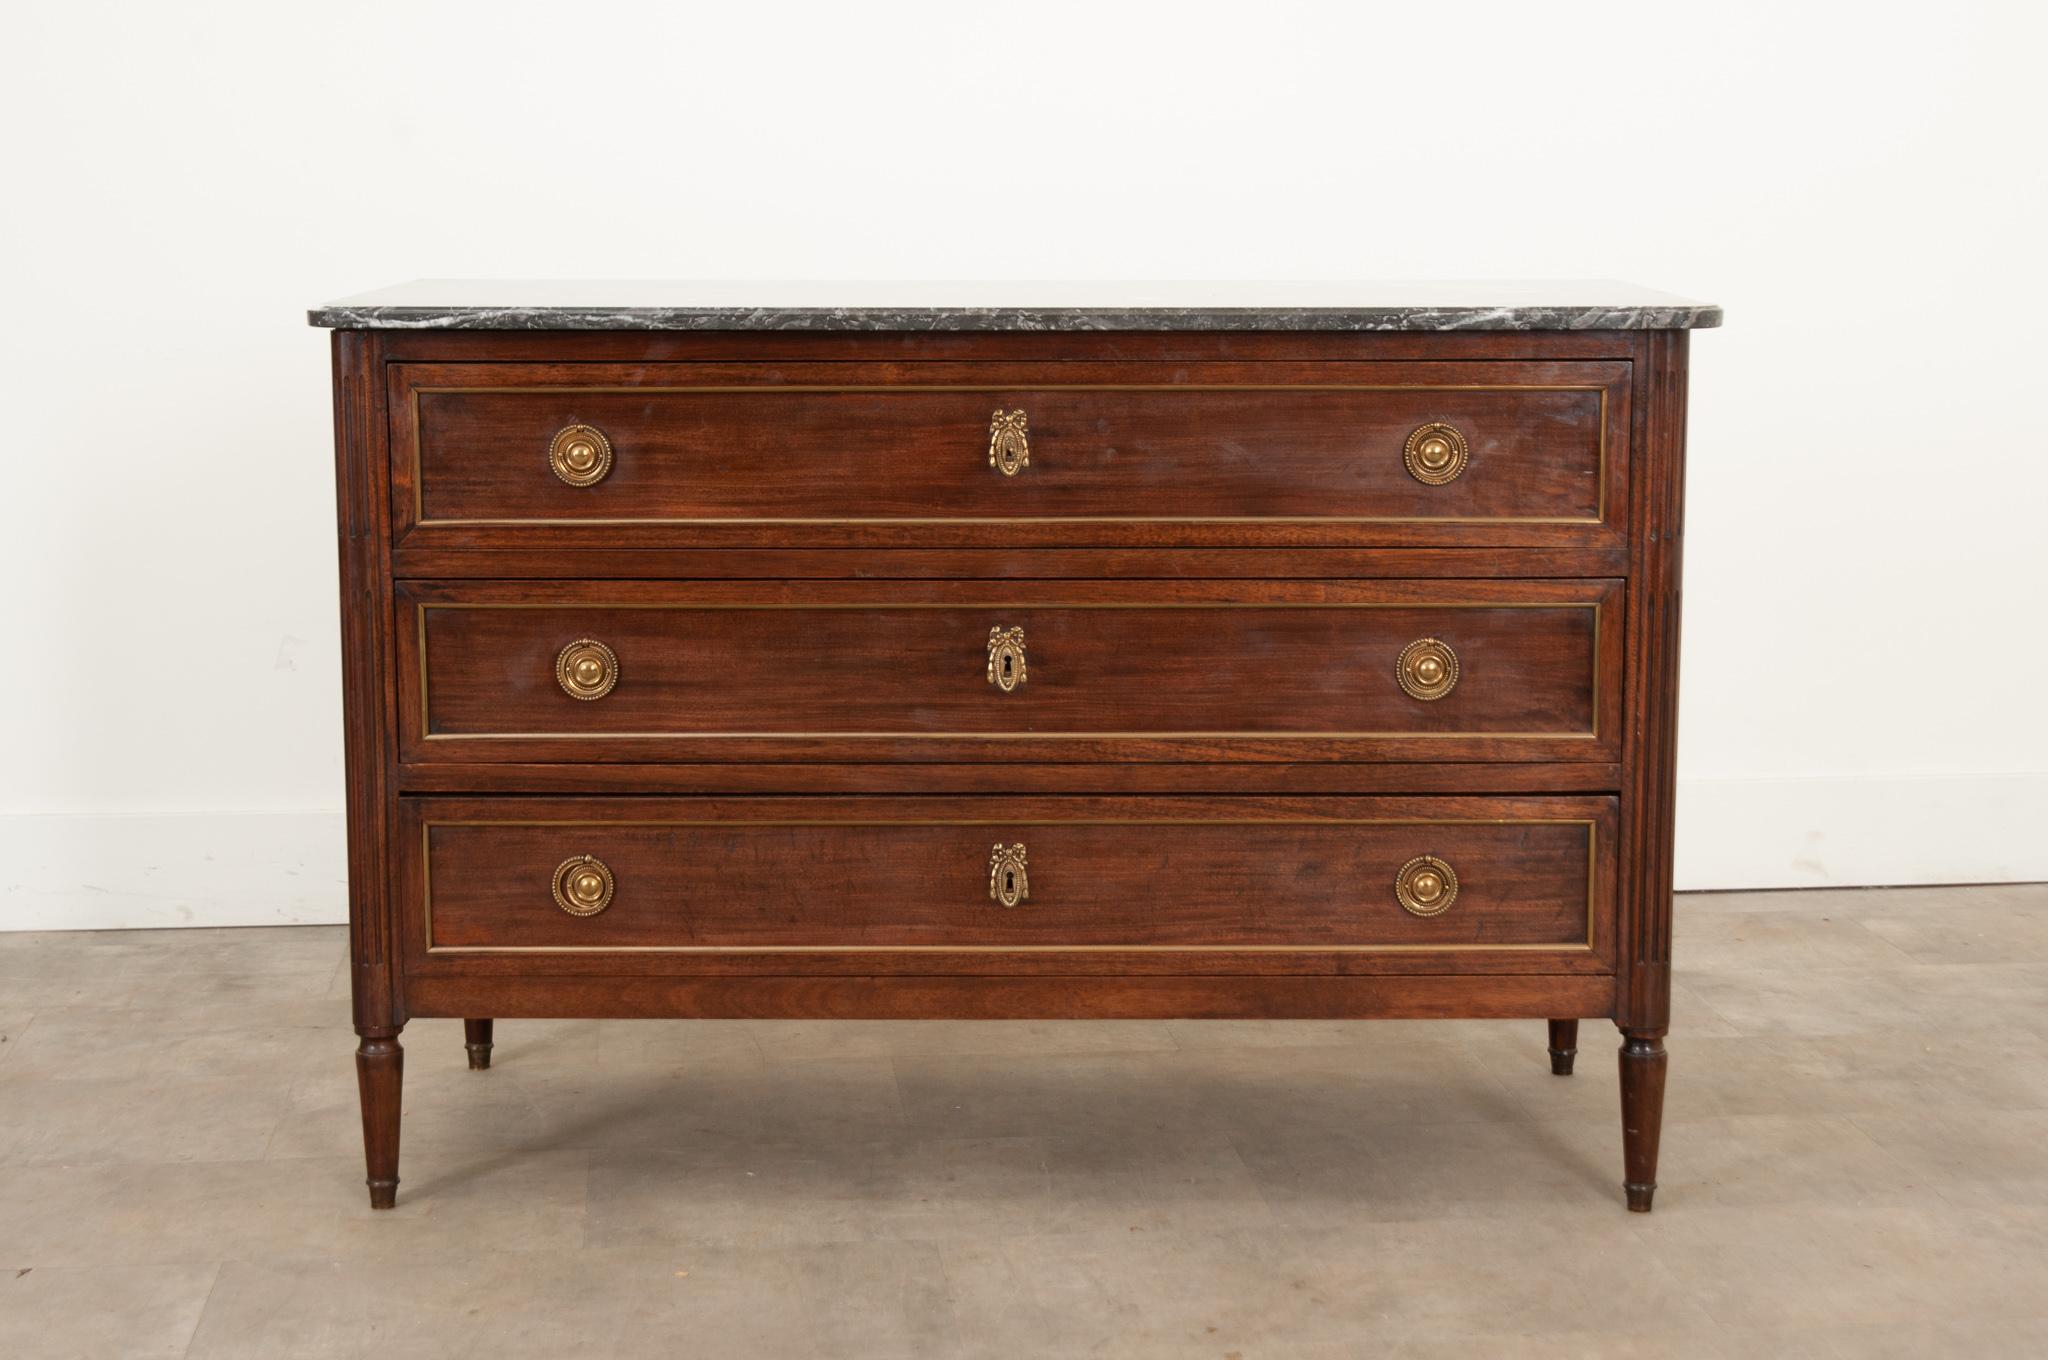 A French 19th century commode that was hand-crafted in France during the 19th century, circa 1830. This case piece features its original shaped marble top, three wide drawers with elaborate beribboned and bellflower escutcheon plates and round brass